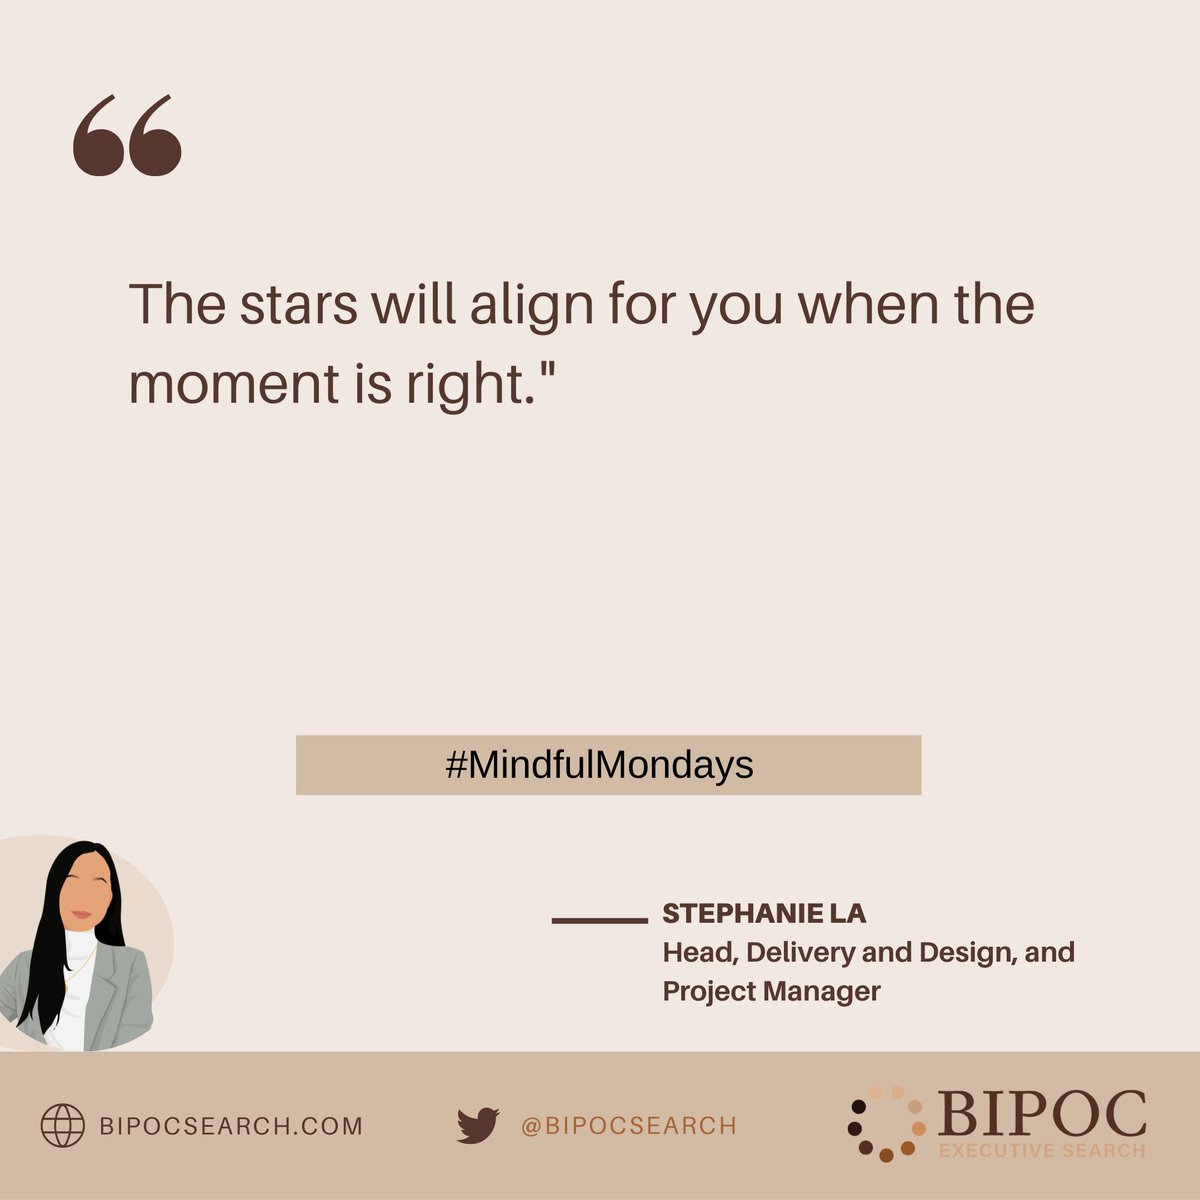 Our Head, Delivery and Design, and Project Manager, Stephanie La, reminds us to trust your timing.

#MotivationalMondays #MotivationalQuote #ExperiencesThatMatter #ConversationStarters #Mindfulness #MindfulMondays #BipocExecutiveSearch #StephanieLa